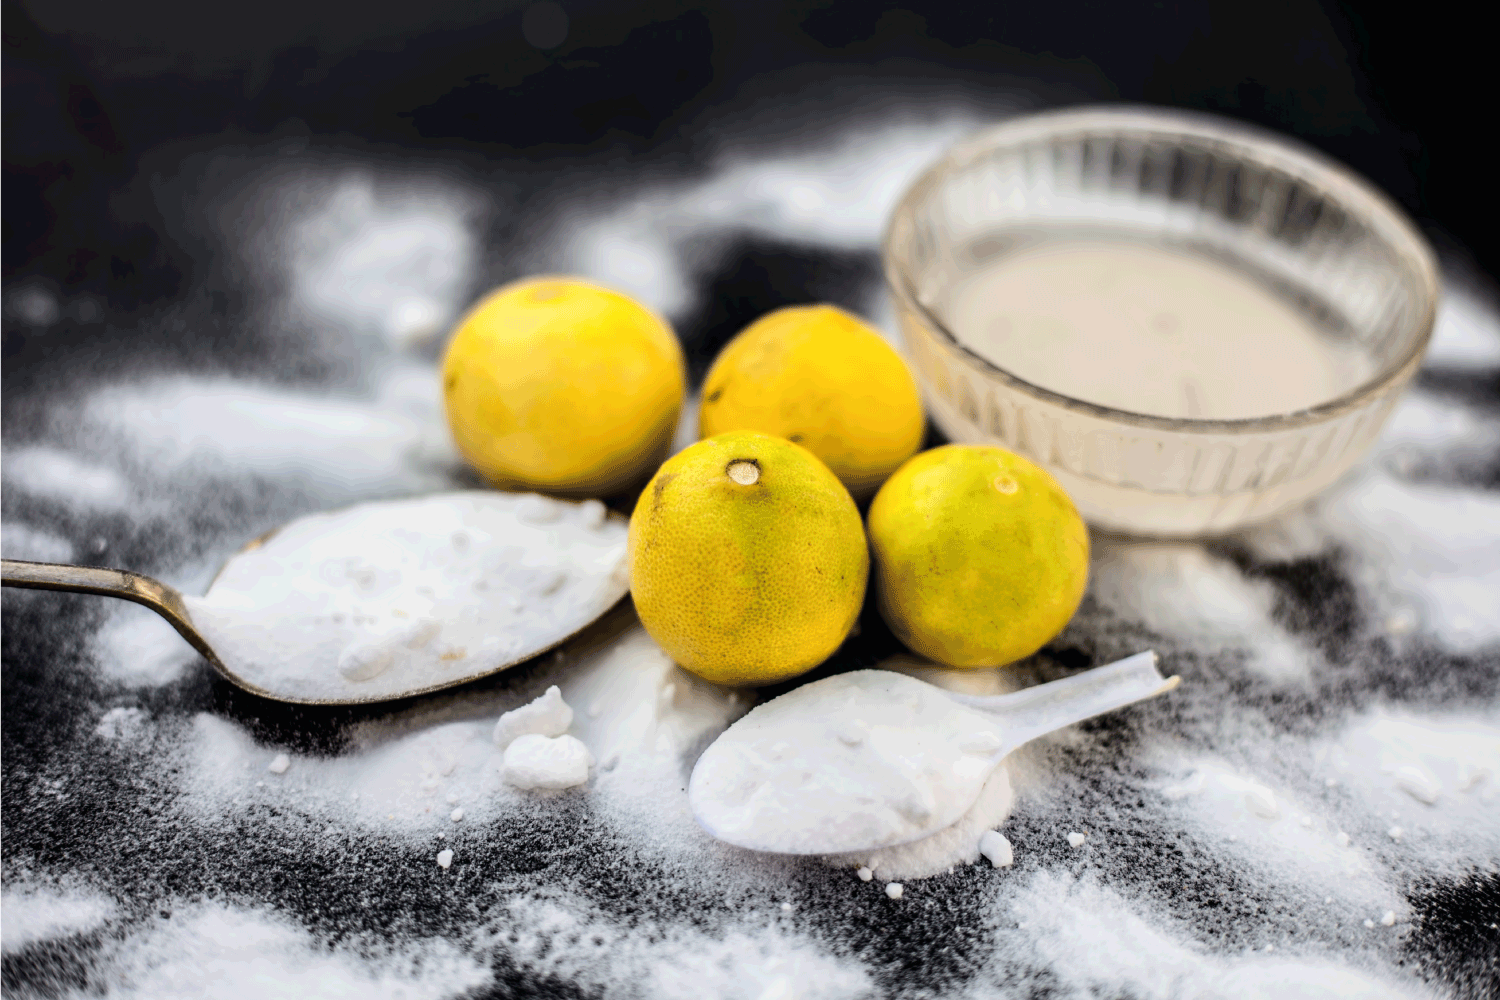 Baking soda in a glass bowl on wooden surface along with some baking soda sprinkled on the surface and lemons also on surface.